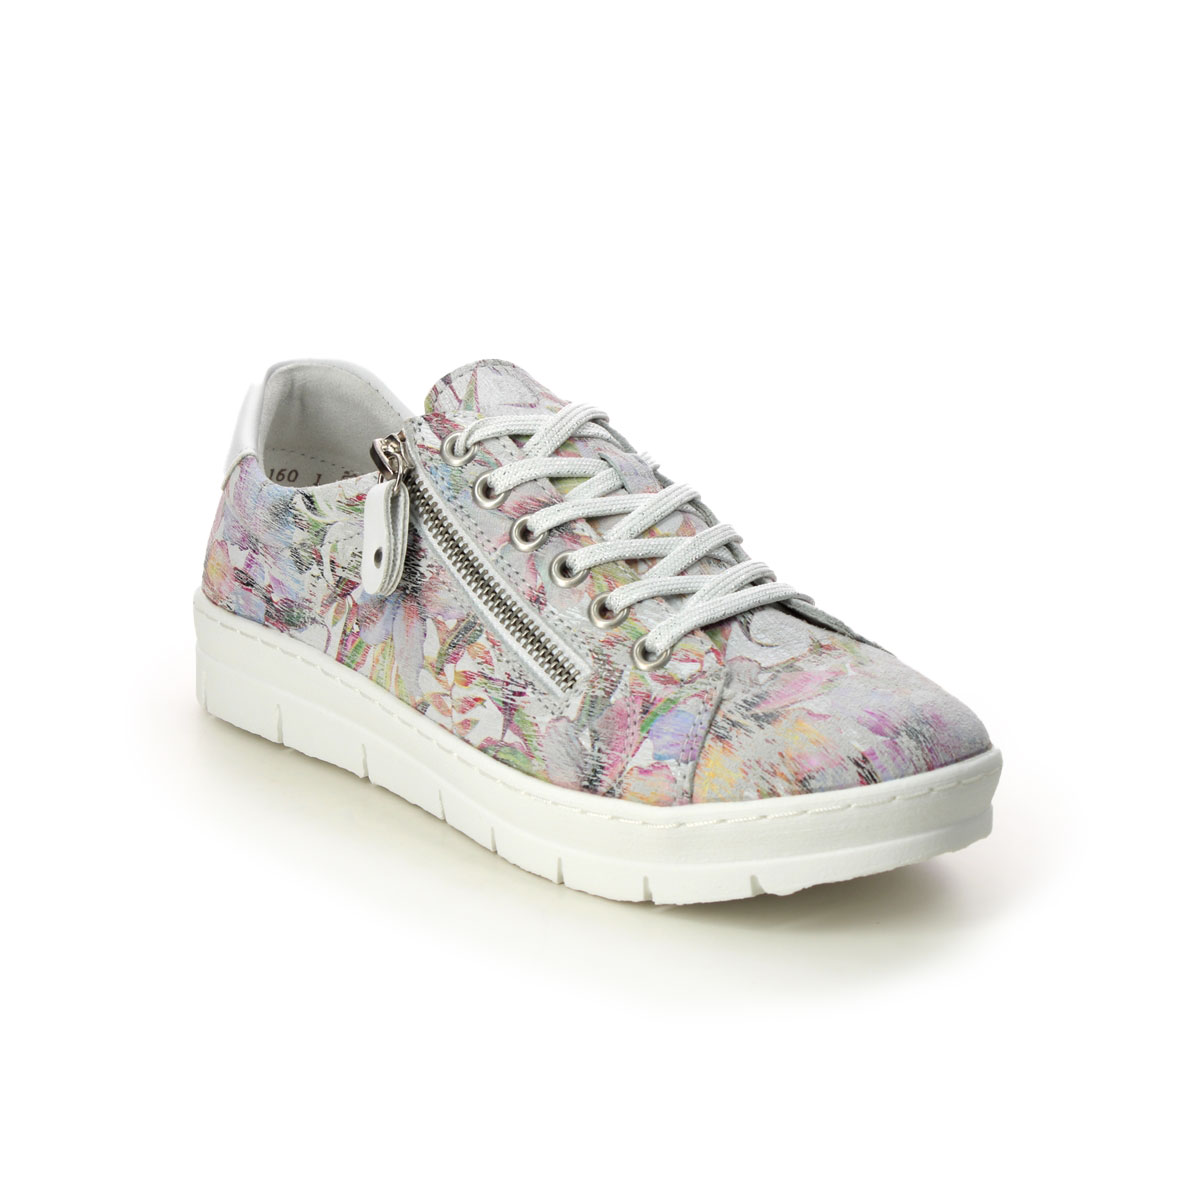 Remonte D5800-91 Ravenna 11 Floral print Womens trainers in a Plain Leather in Size 38